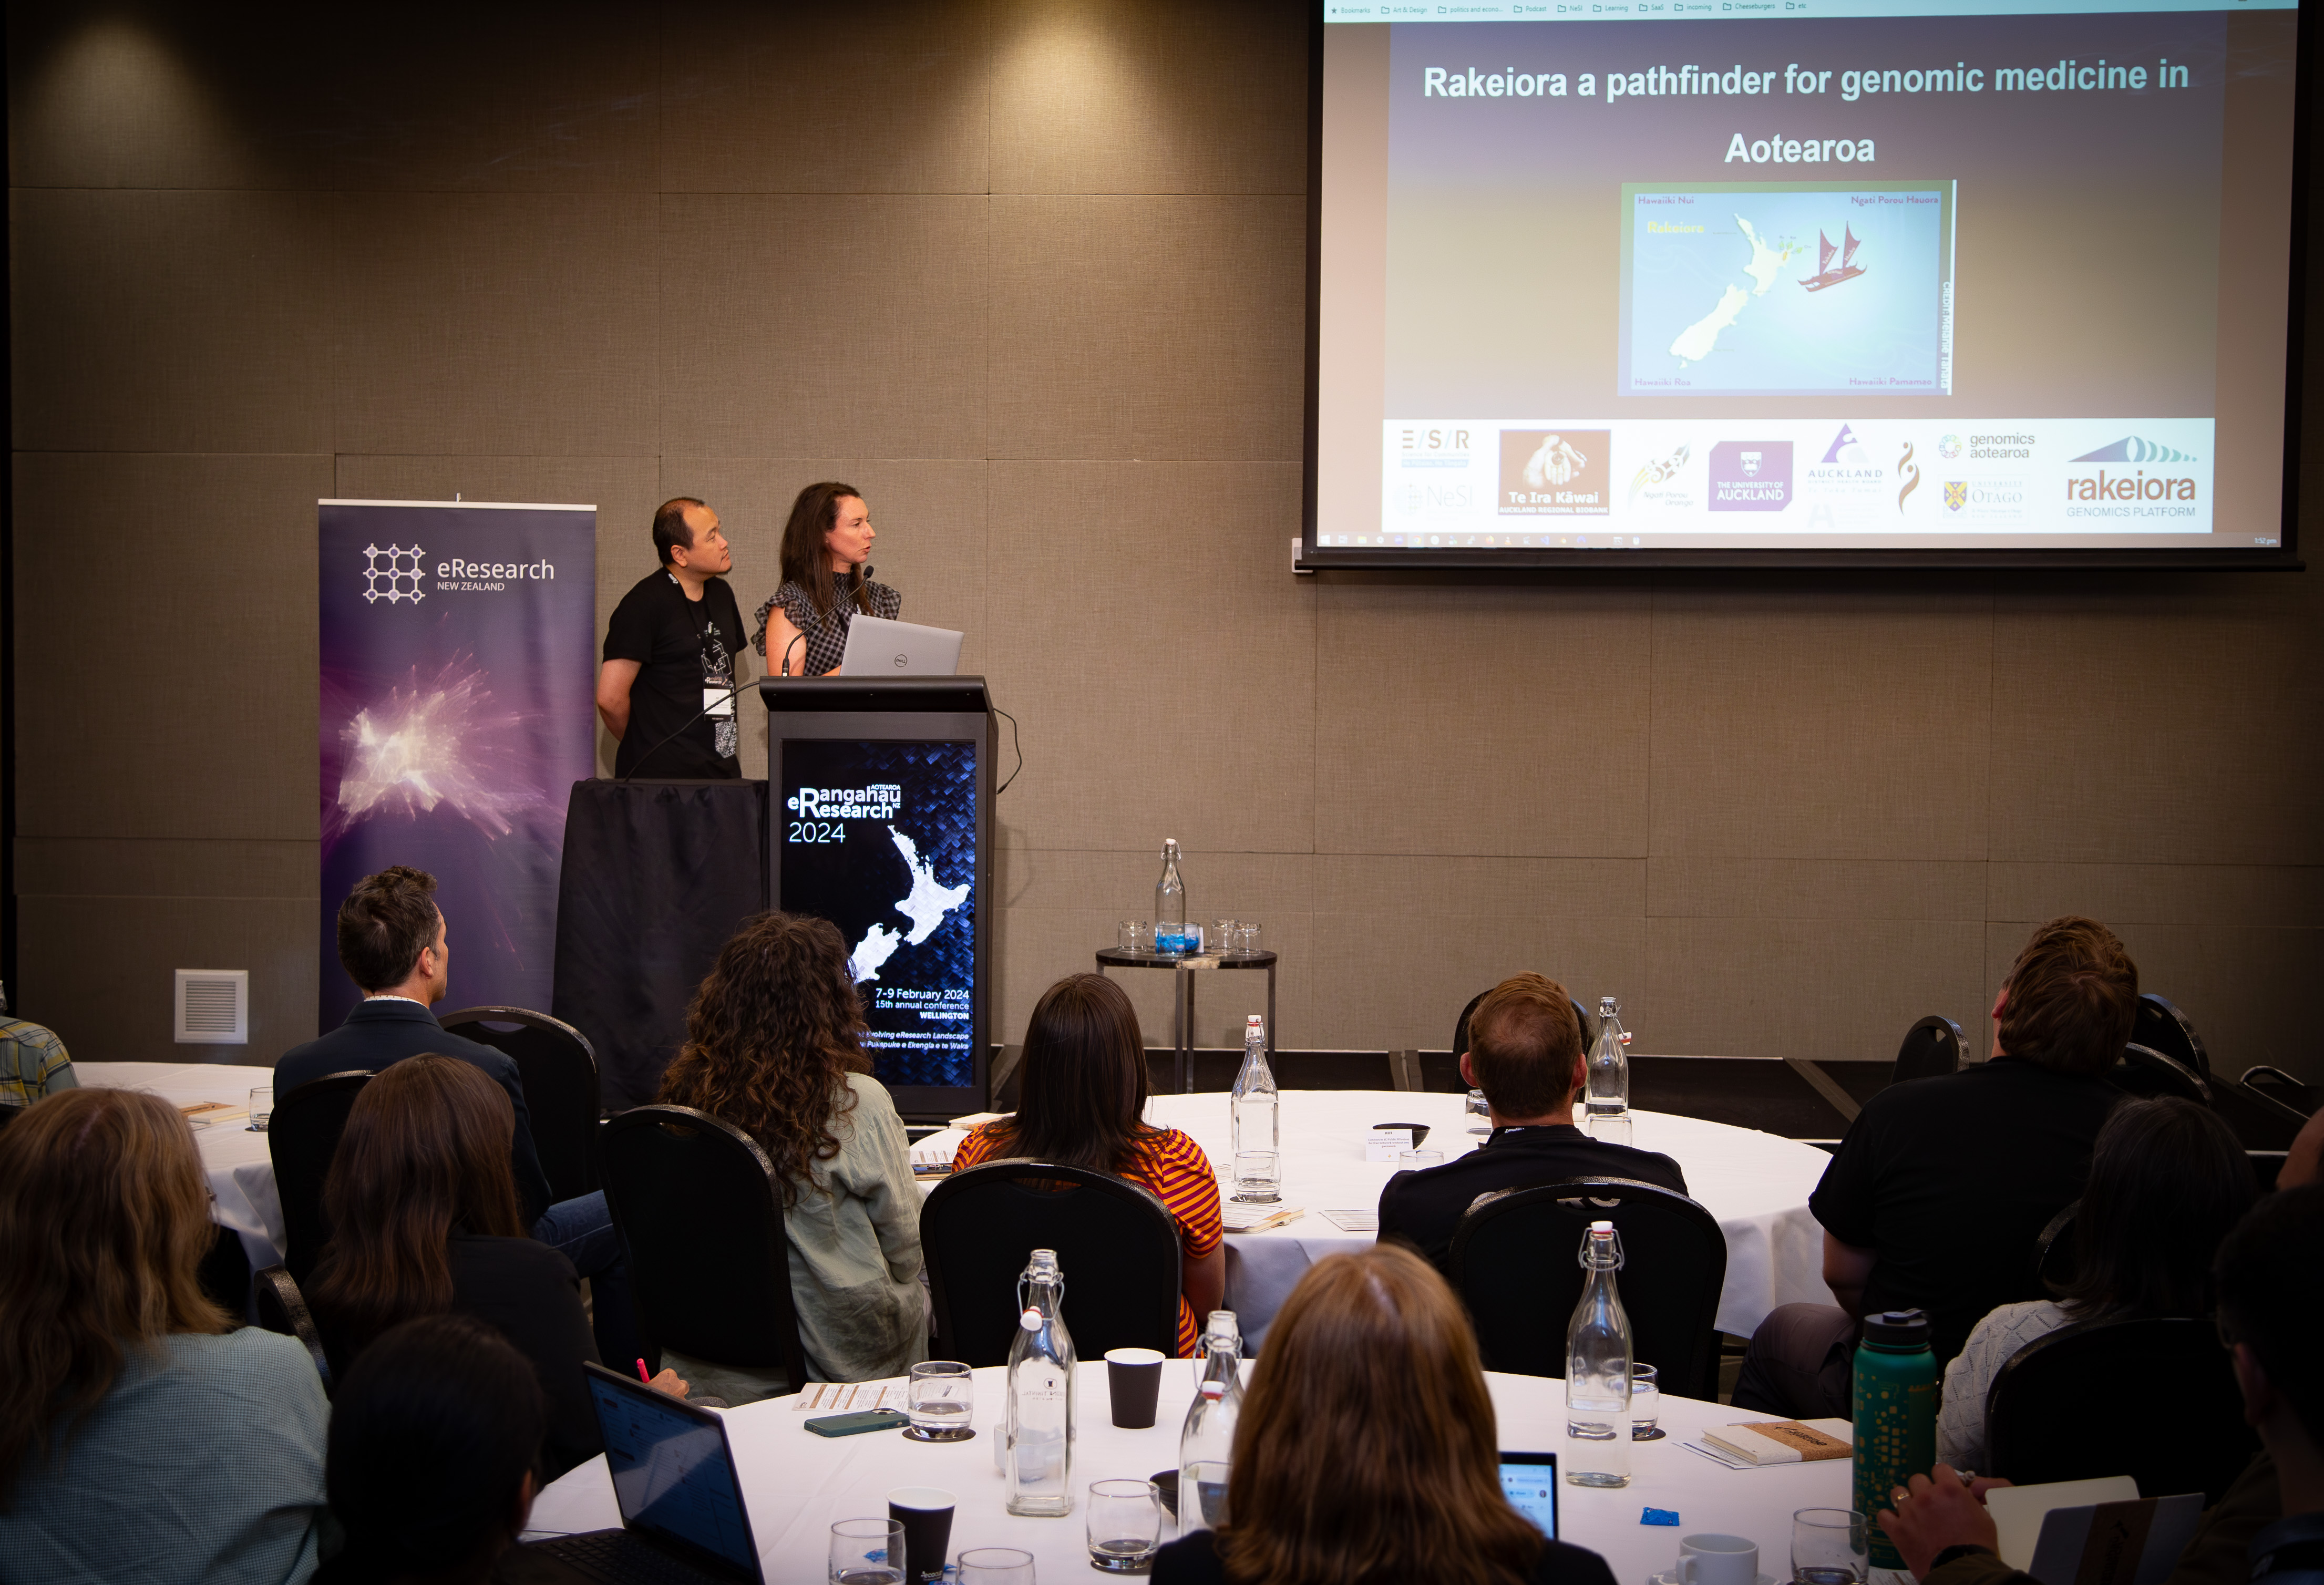 Claire Rye and Jun Huh from NeSI presenting on the Rakeiora pathfinder project.